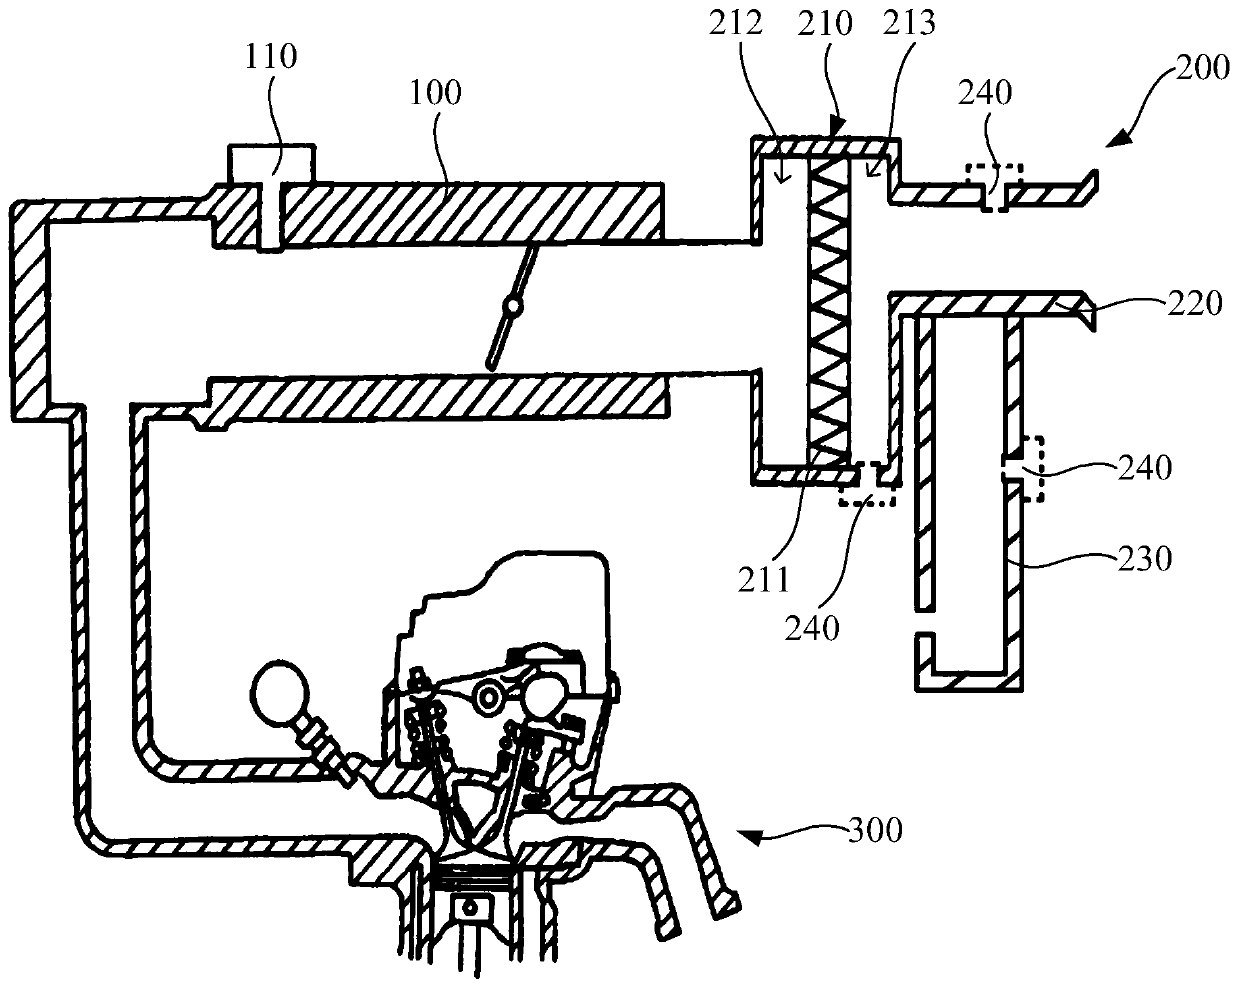 Engine and pressure testing mechanism thereof